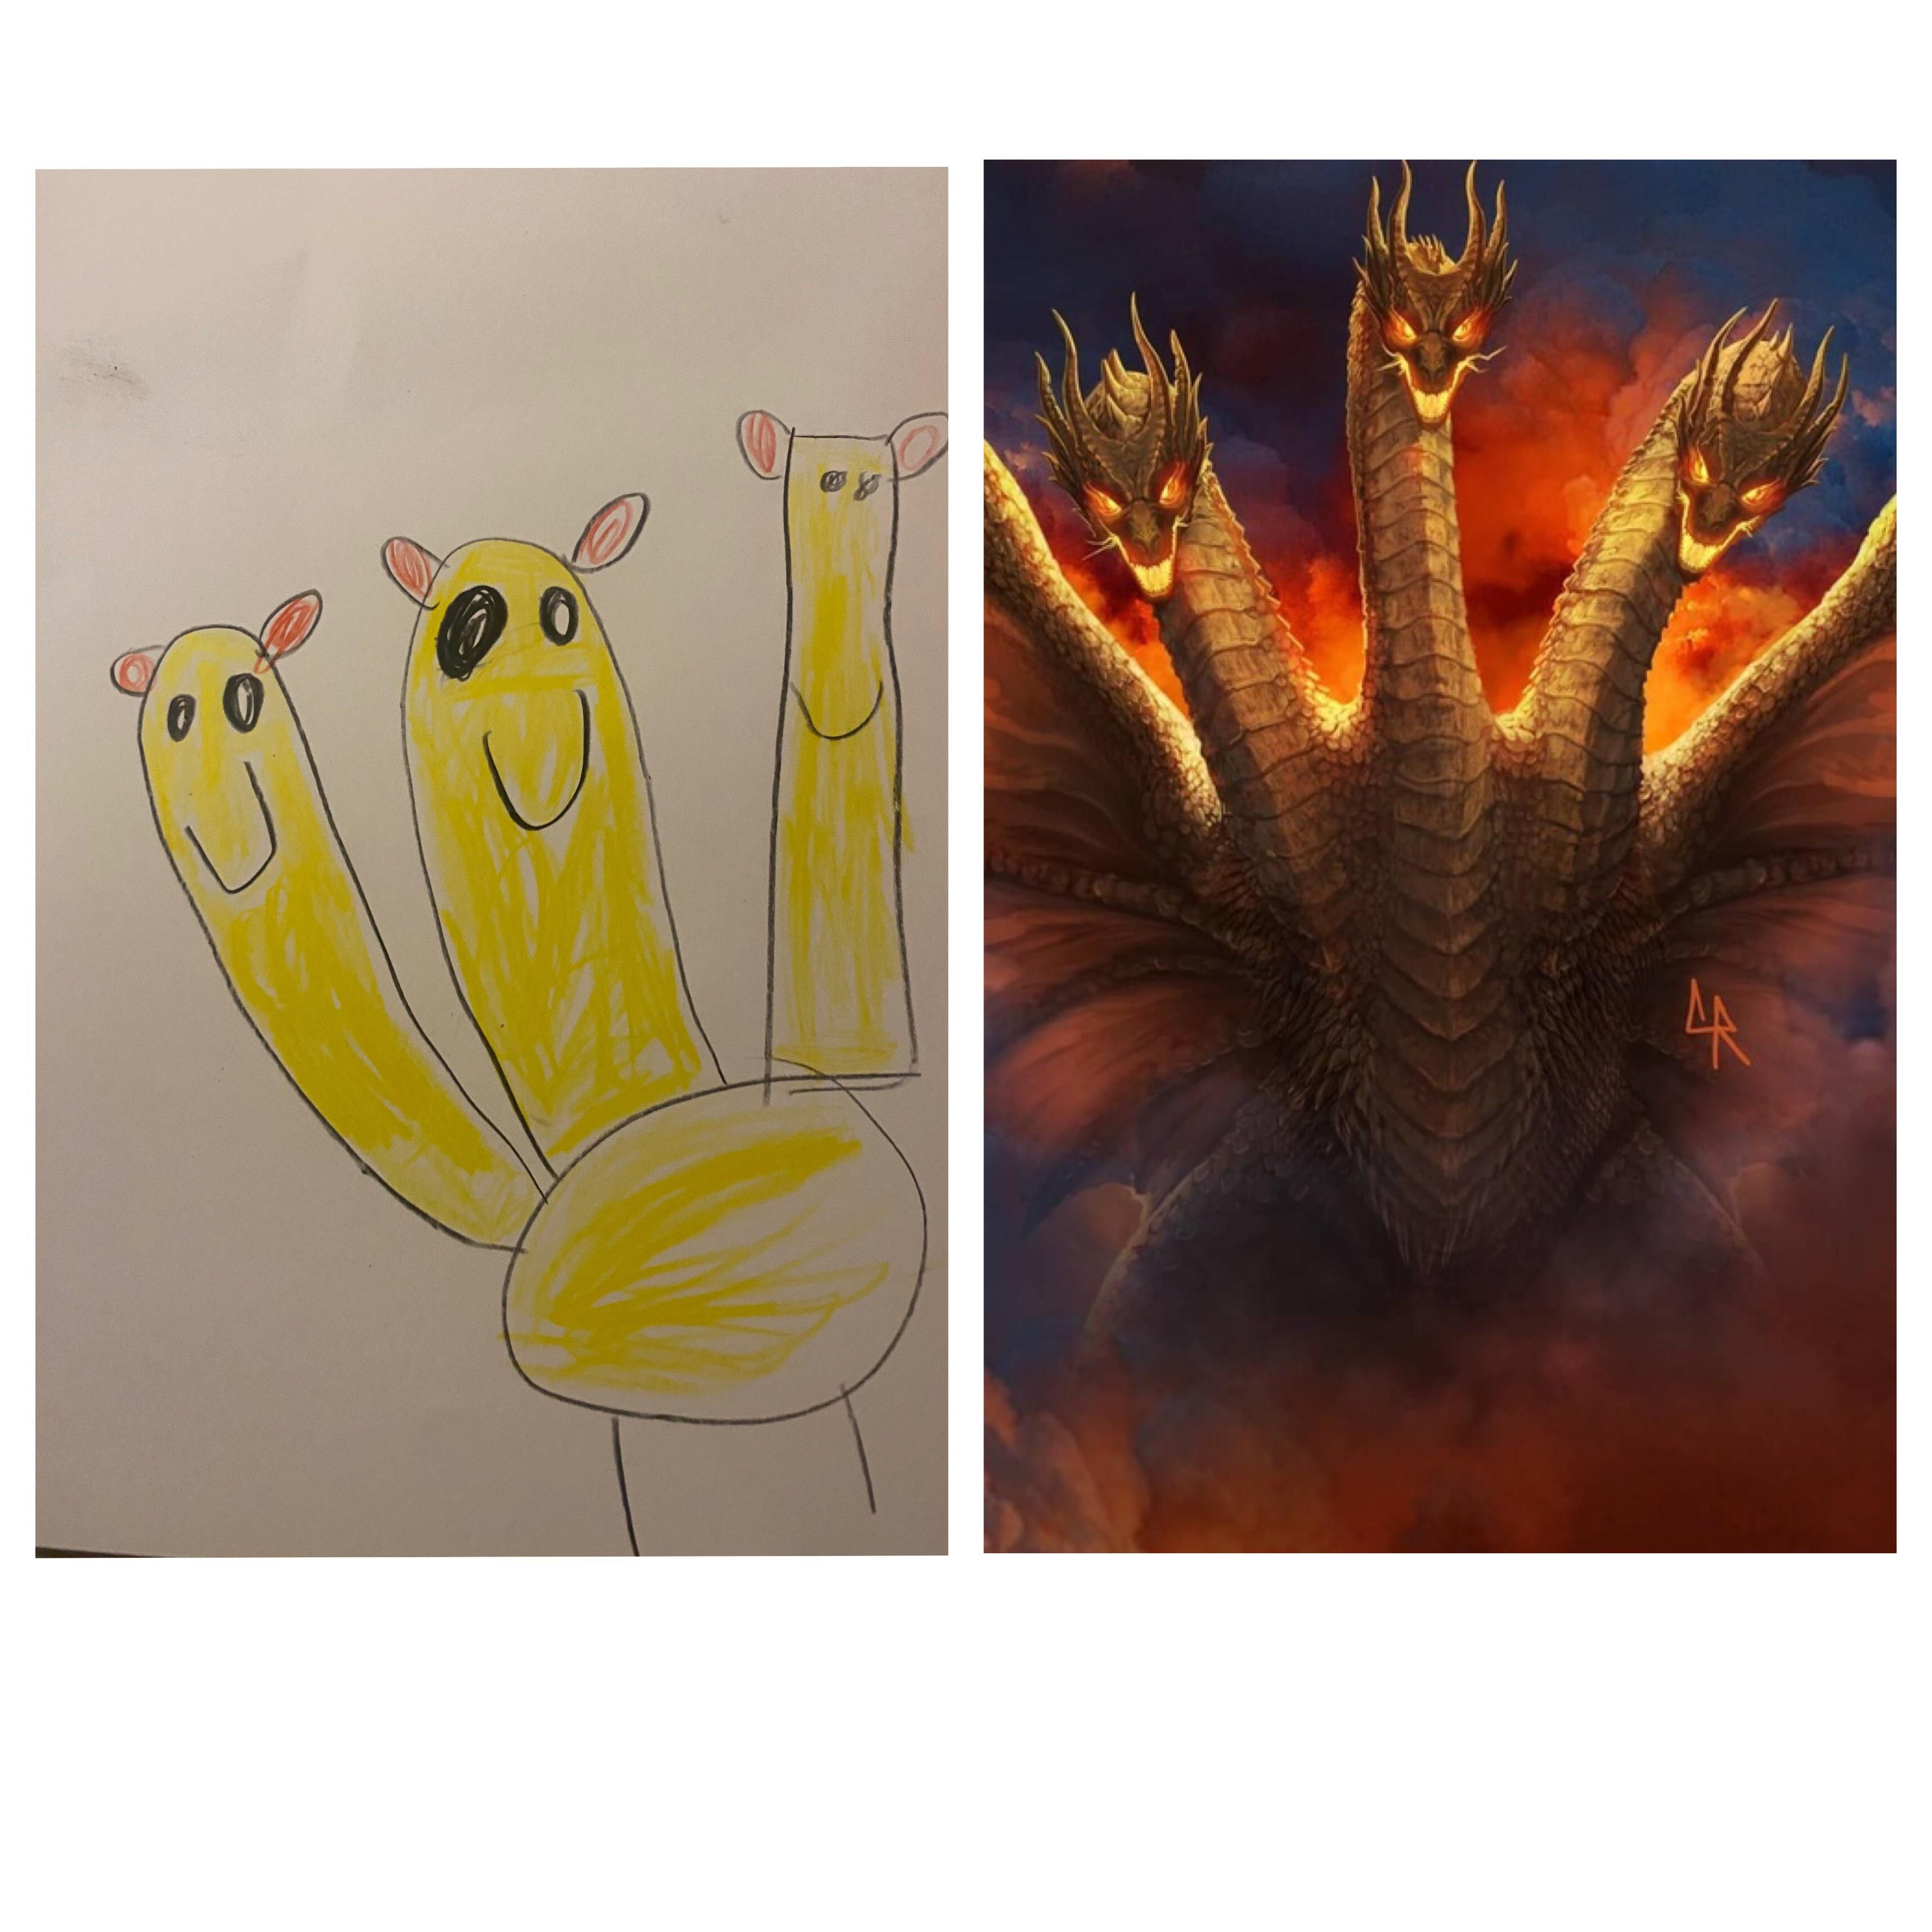 My 5 year old nephew loves Godzilla and was pretty proud of his King Ghidorah drawing.